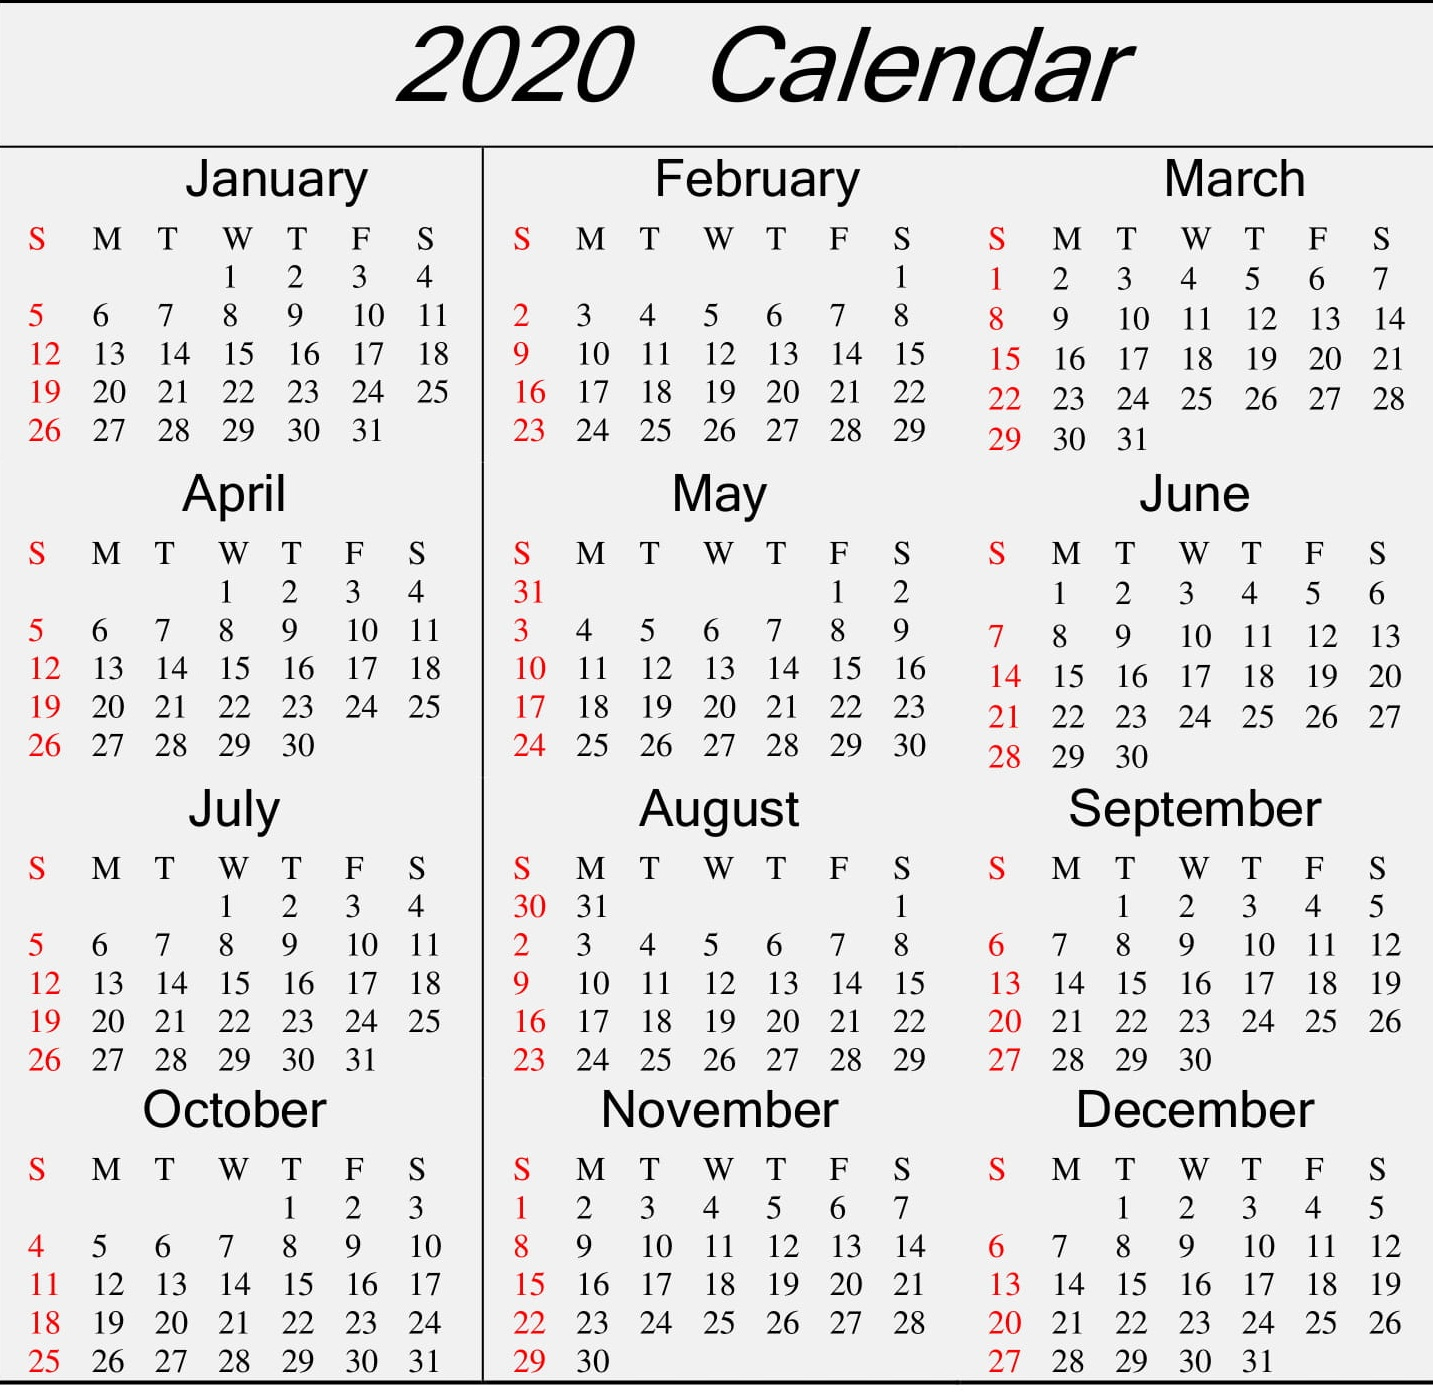 Calendar 2020 Template In Word, Excel And Pdf - Latest